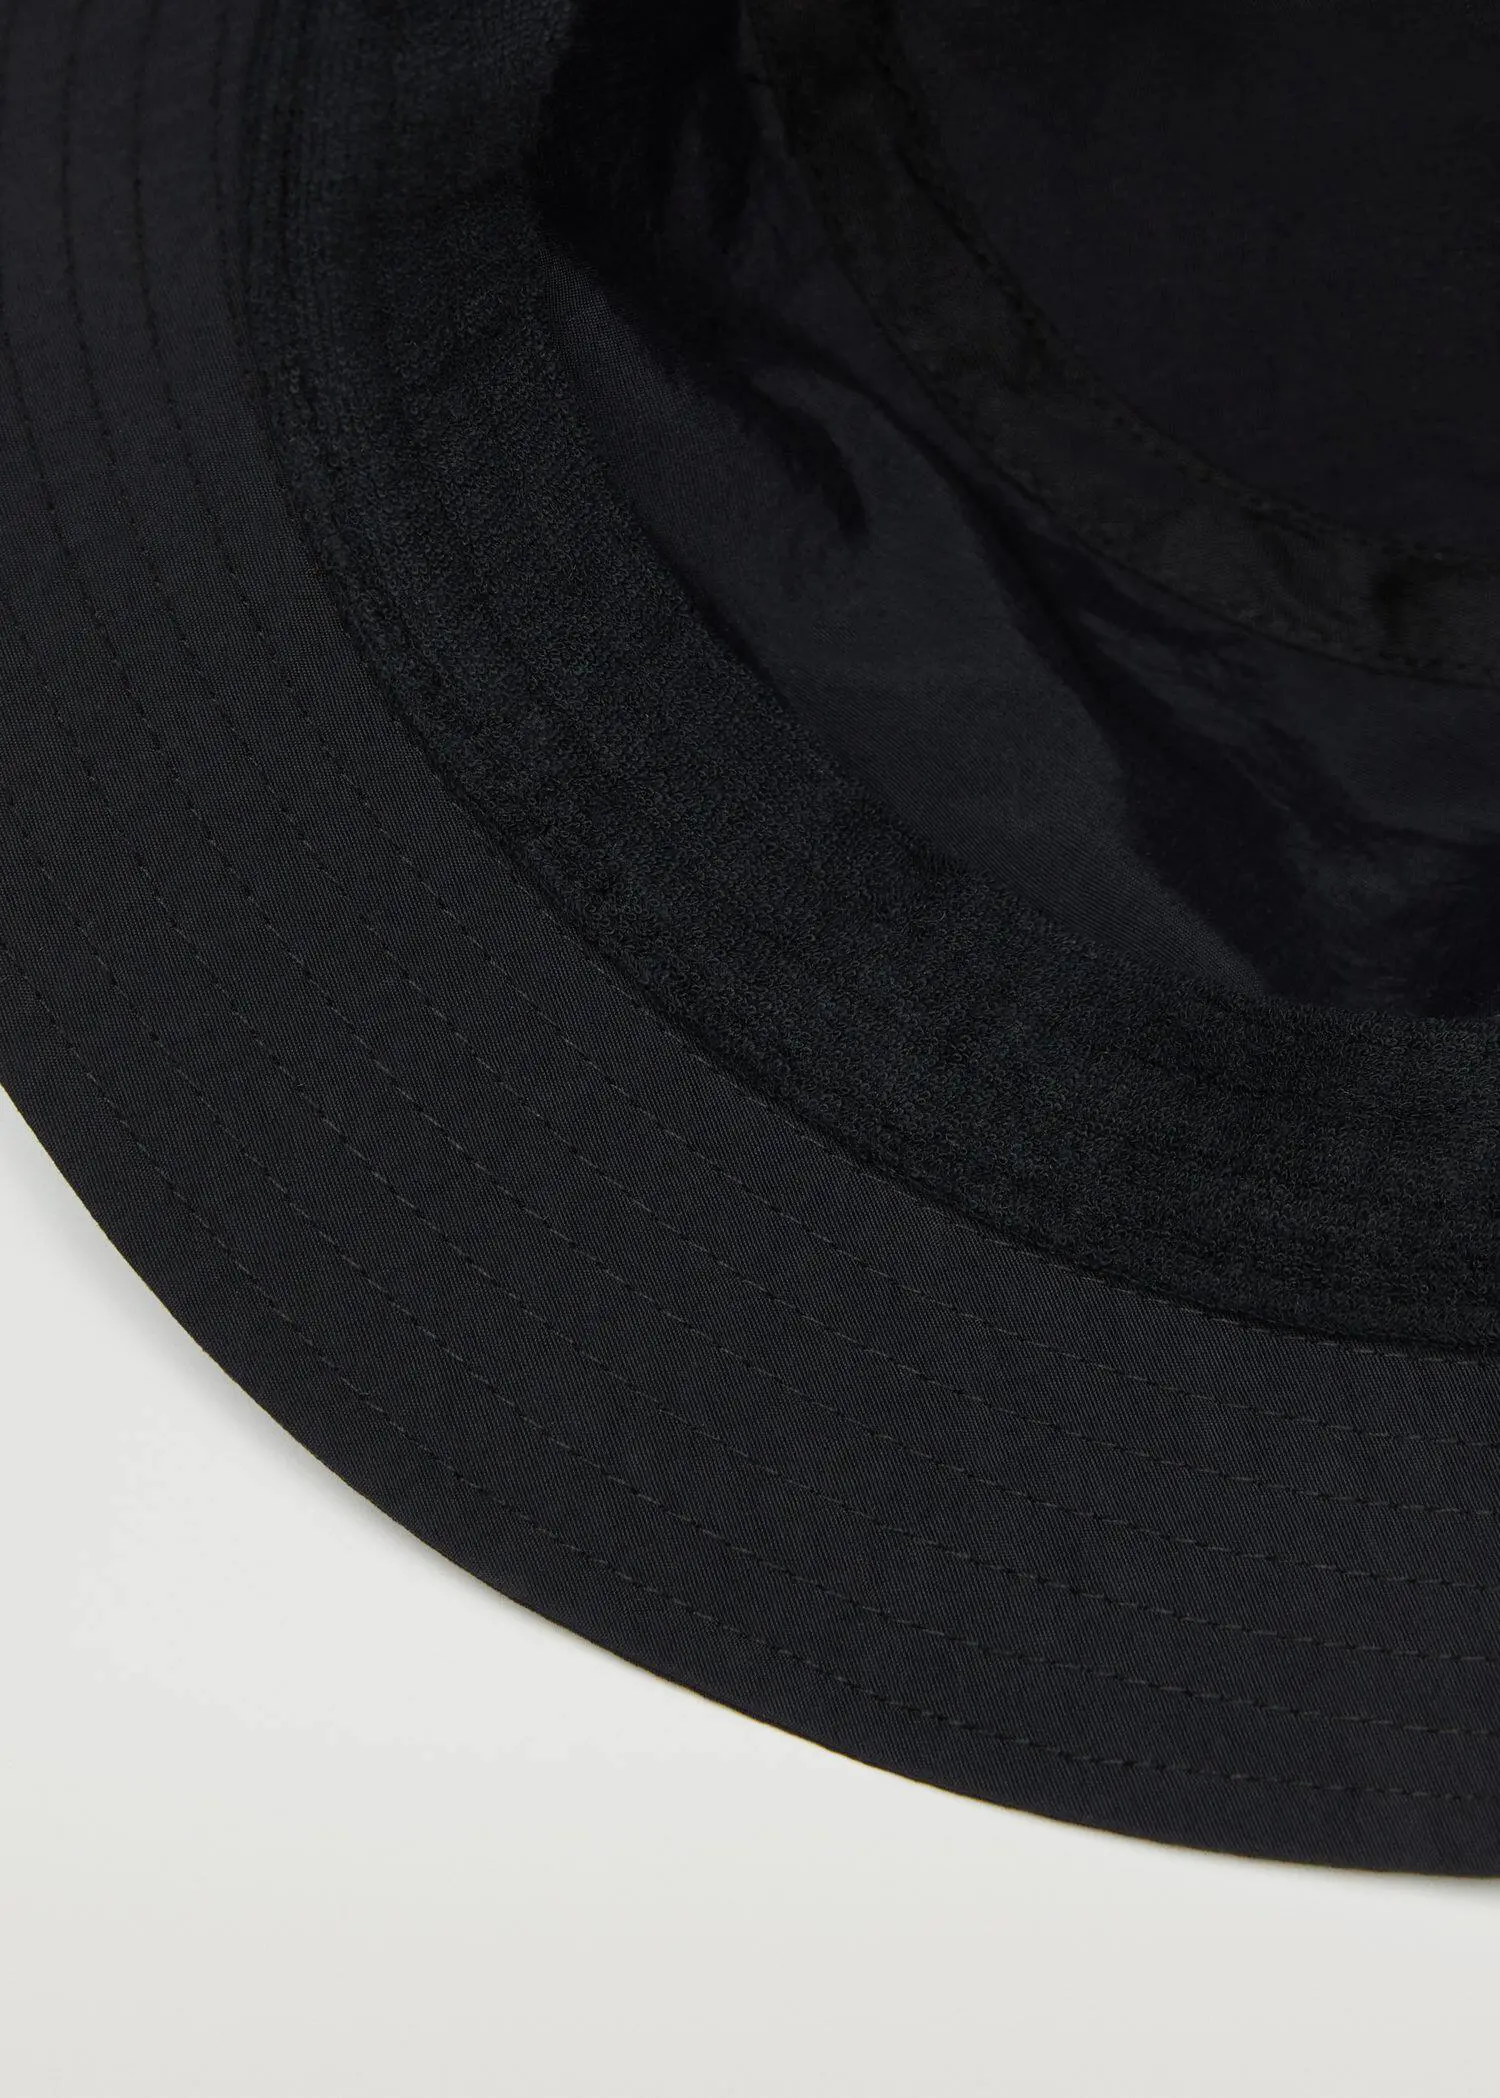 Mango Breathable hiking hat. a close-up view of a black hat. 